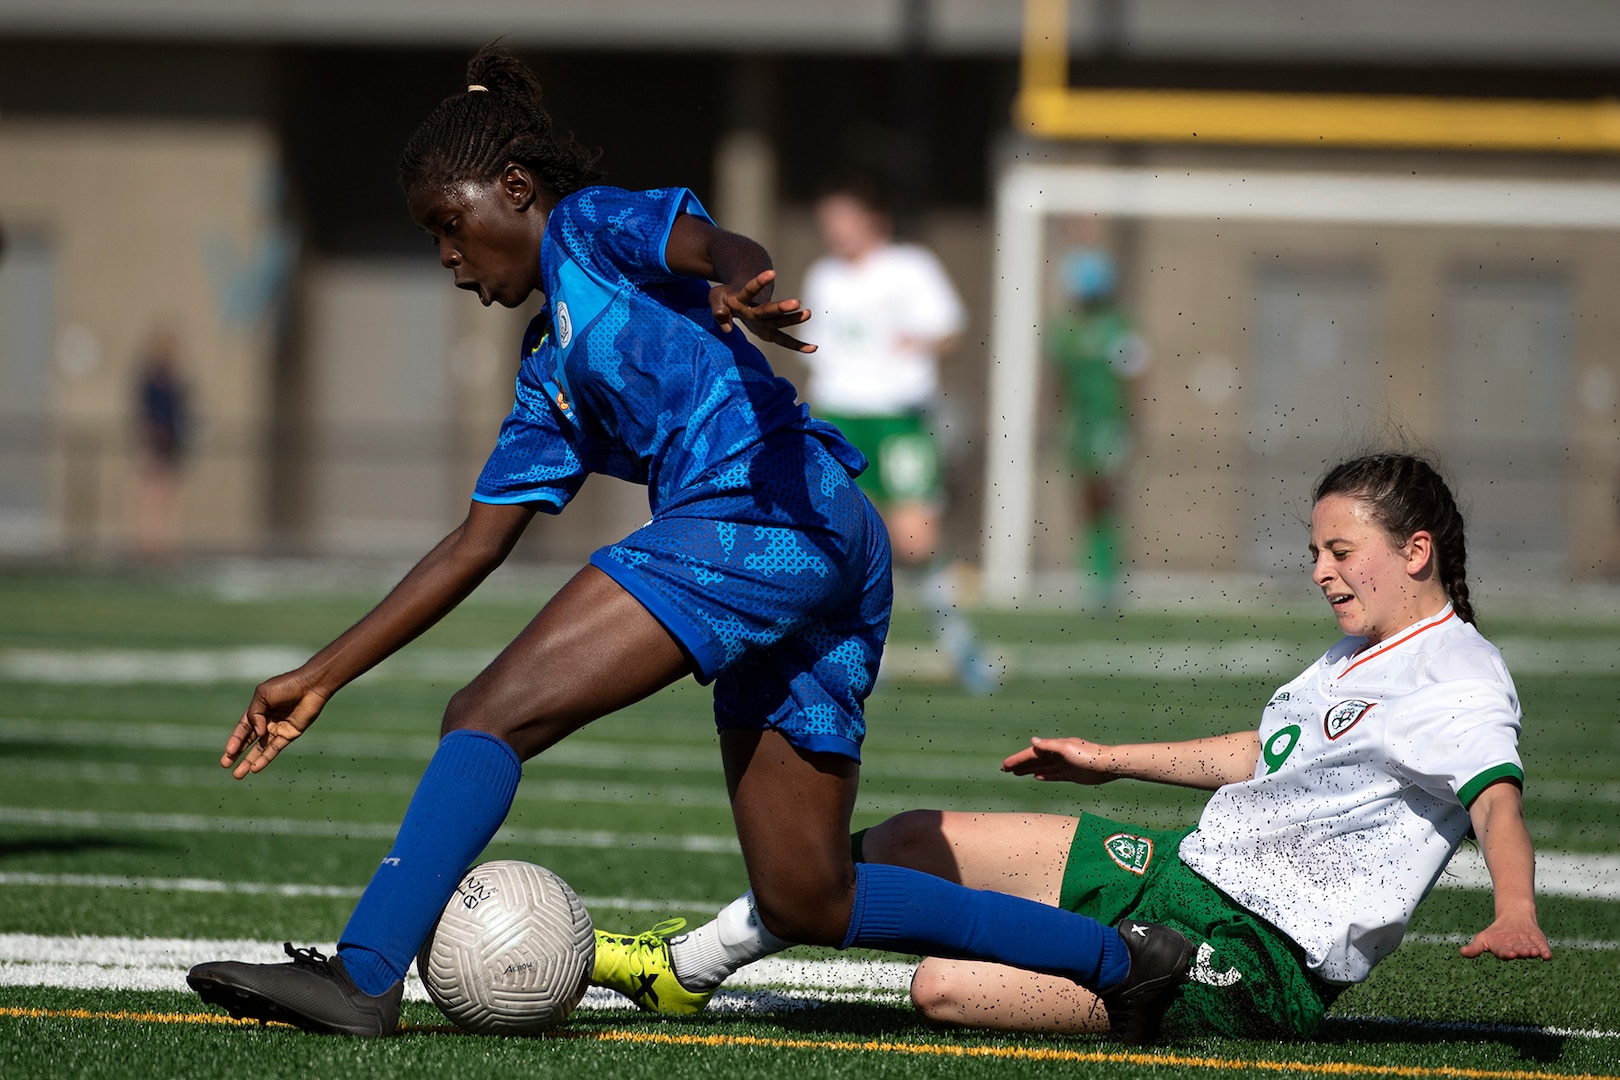 Ireland’s Angela McGuigan slides into Cameroon’s Linda Ngatchou Degoue during the 13th CISM (International Military Sports Council) World Military Women’s Football Championship in Meade, Washington July 15, 2022. (DoD photo by EJ Hersom)